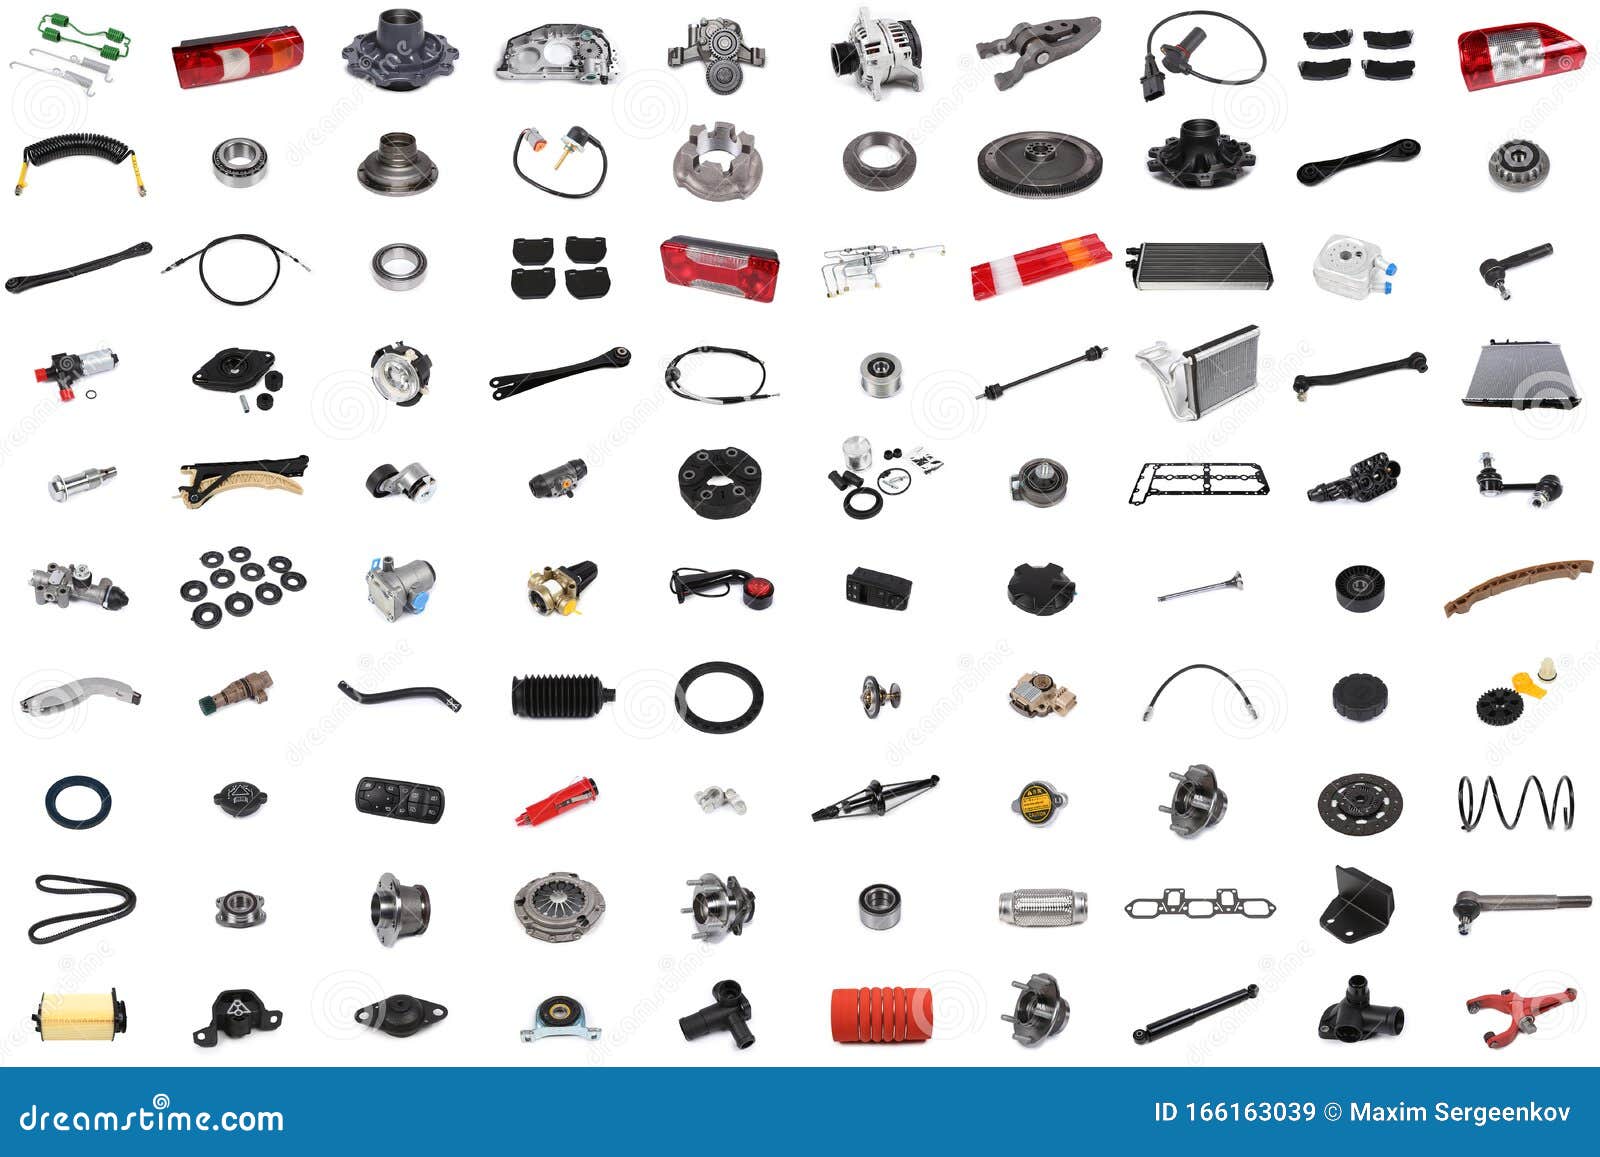 inch Tochi boom Perioperatieve periode Collage of 100 auto parts stock image. Image of background - 166163039